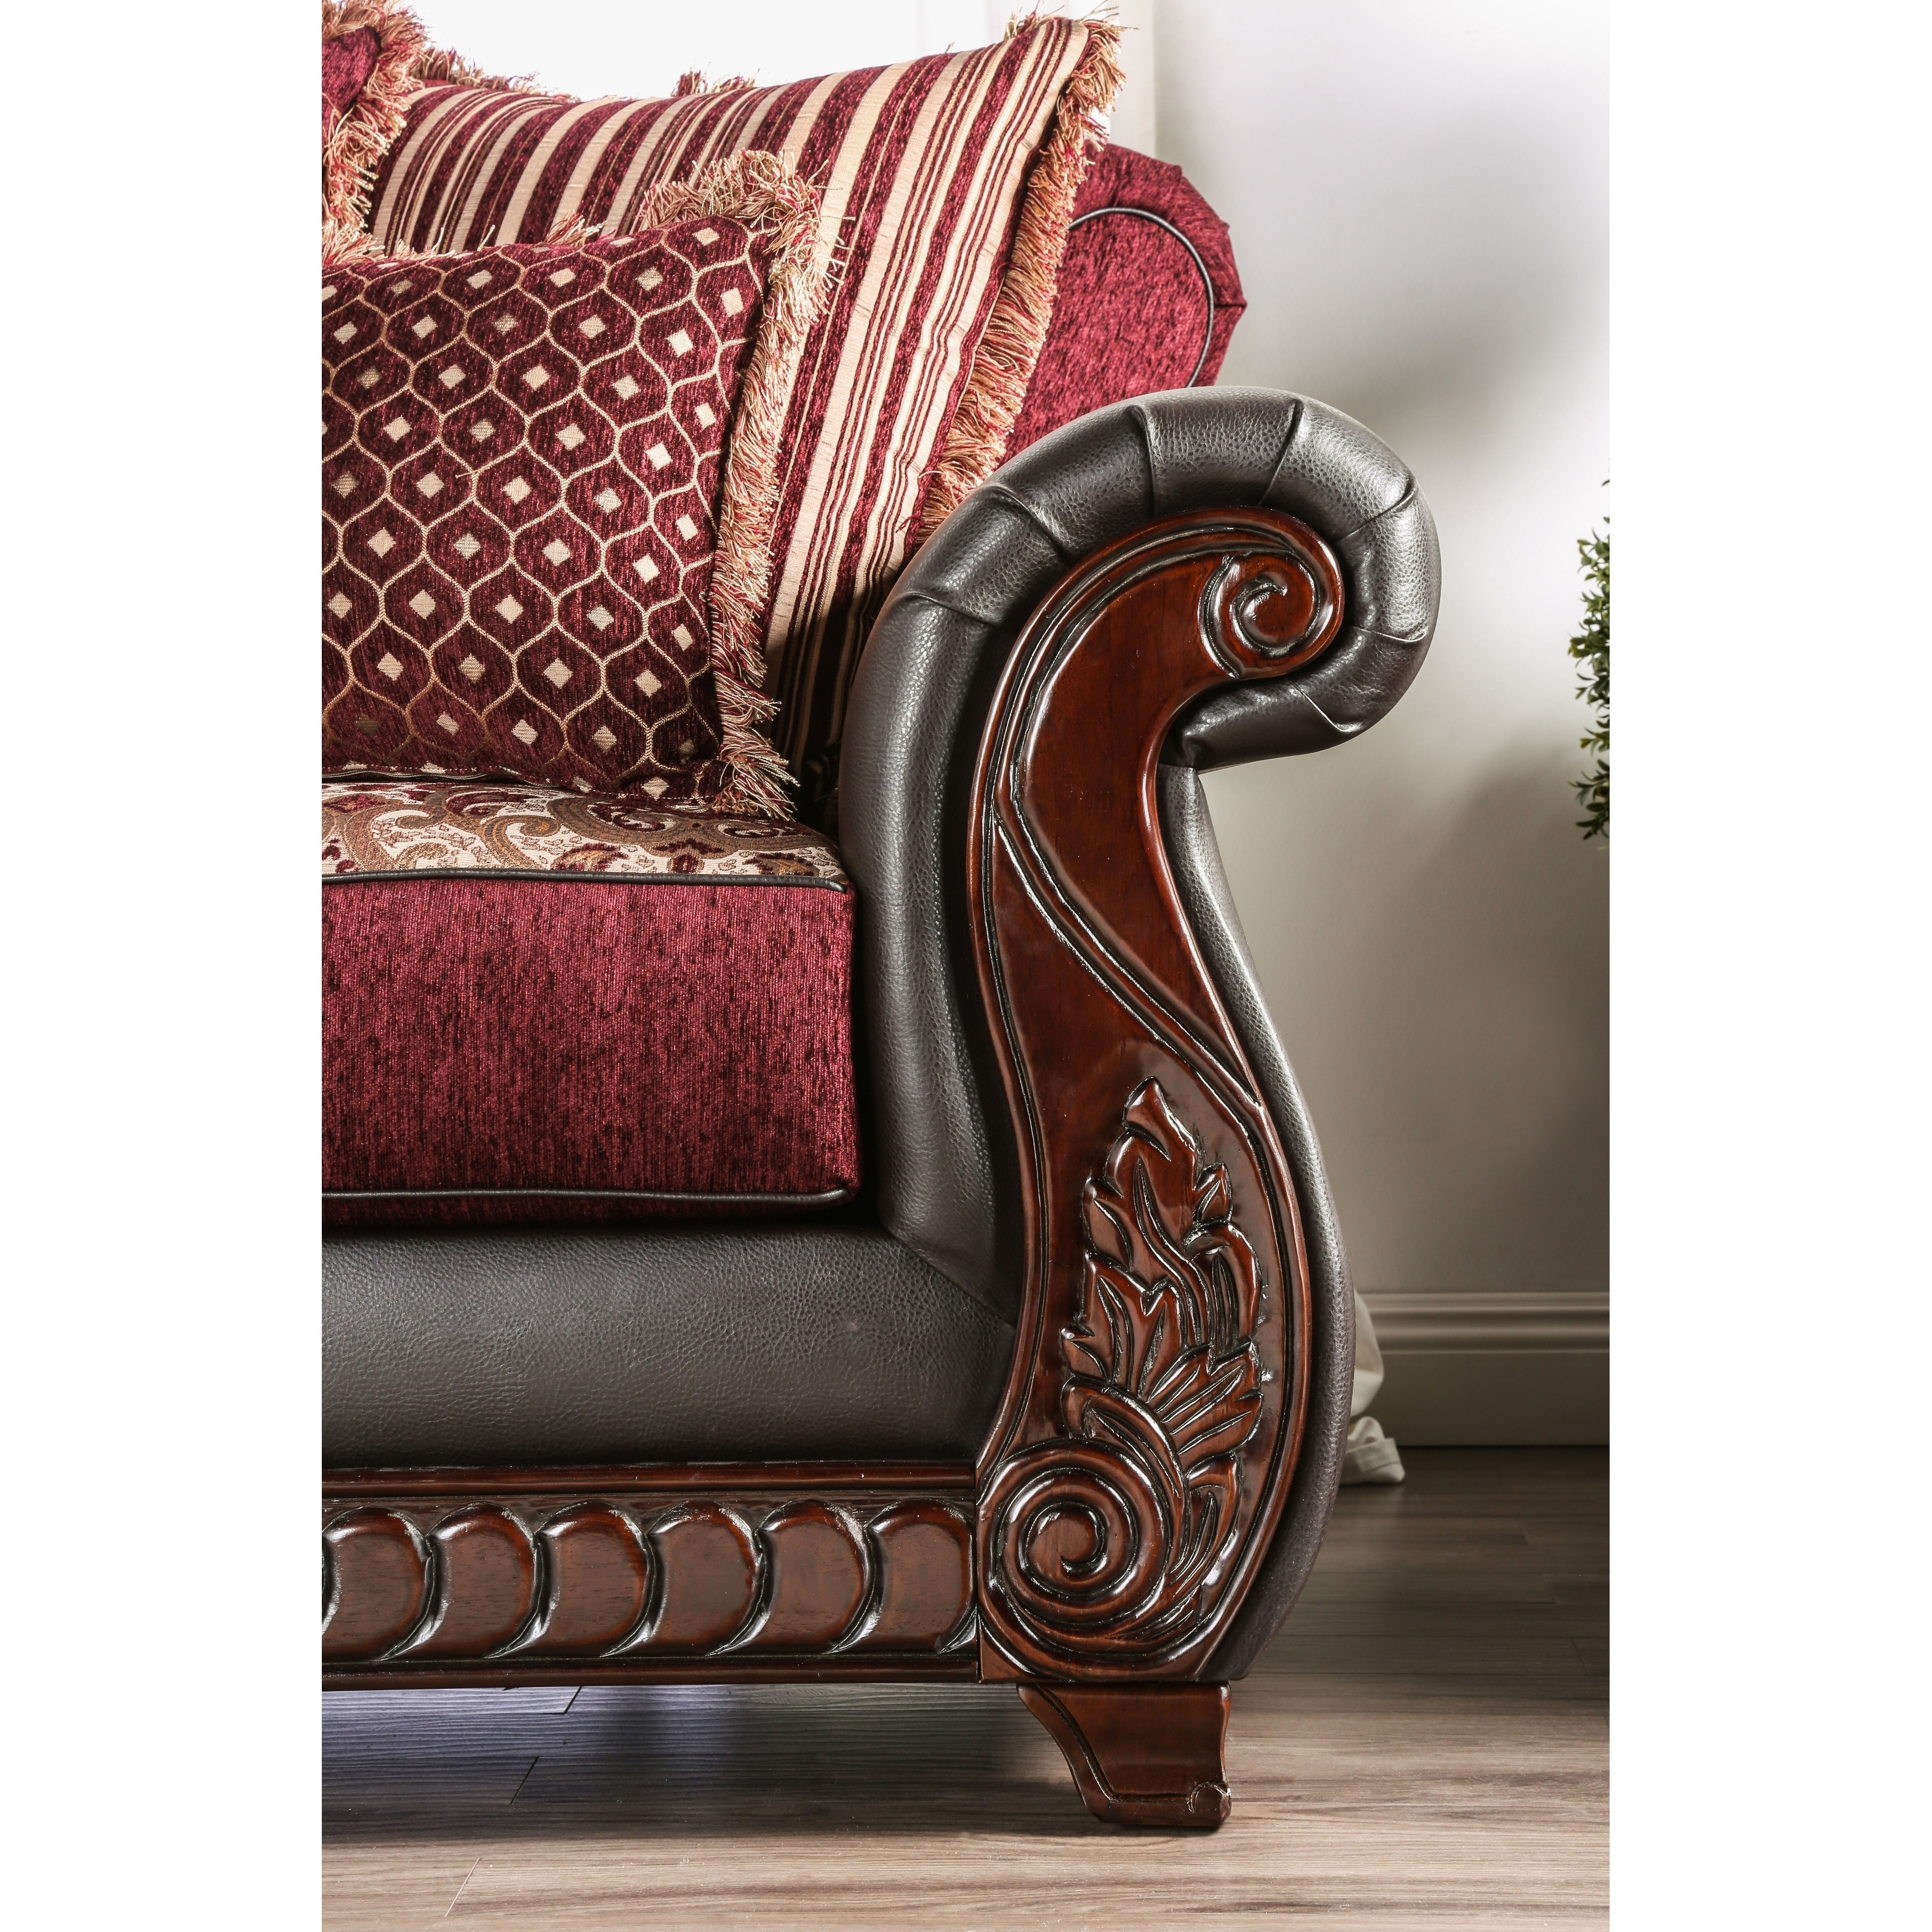 Leather by Bed - Bath Corz On 2-Piece of Furniture Traditional - Sofa & Beyond Brown Set Sale America 8942332 - Faux